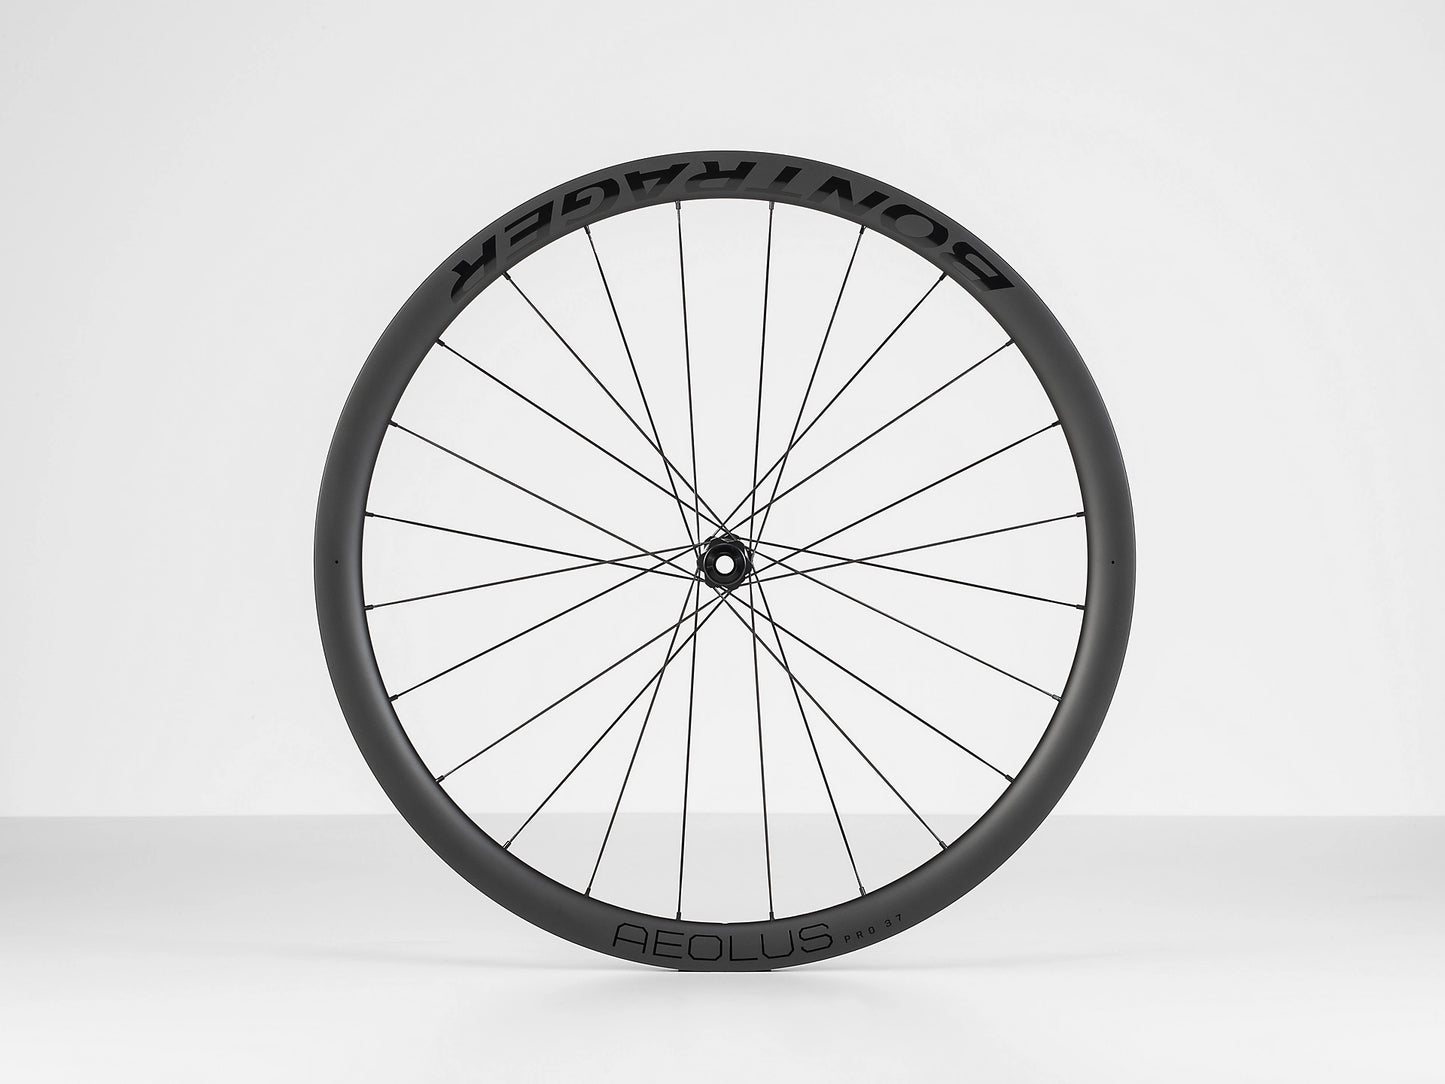 Bontrager Aeolus Pro 37 Wheel - Front with a white background